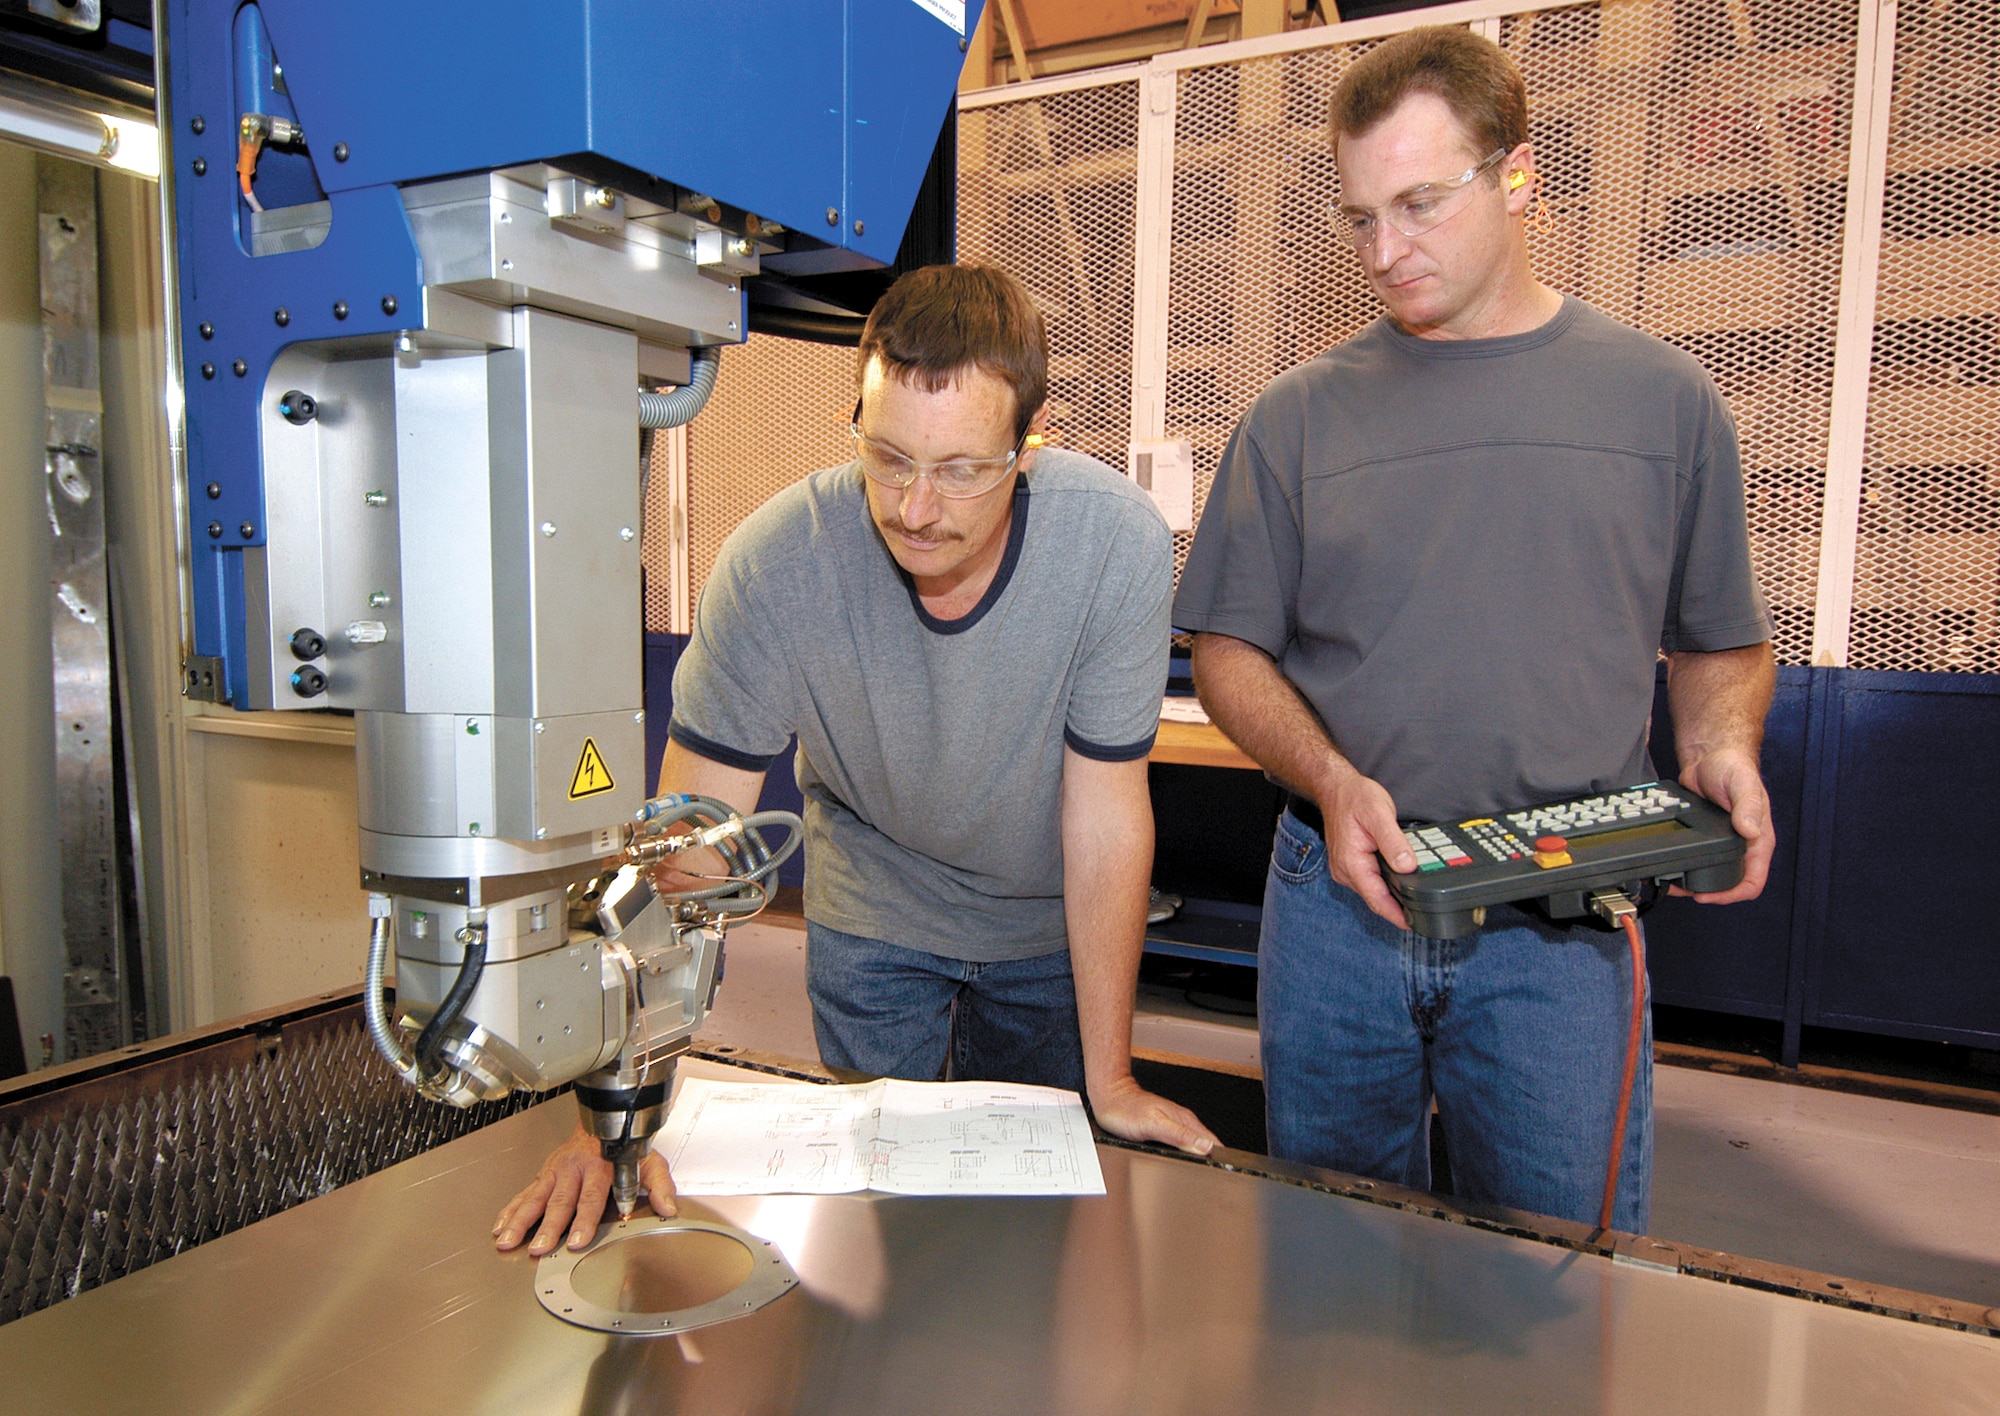 TINKER AIR FORCE BASE, Okla. -- Ricky Harris (left) and Paul Spurlock can program the carbon dioxide laser to precisely carve small or large engine parts quieter, cleaner and safer than many other methods.  They are machinists with the computer numerical control shop here.  (U.S. Air Force photo by Margo Wright)